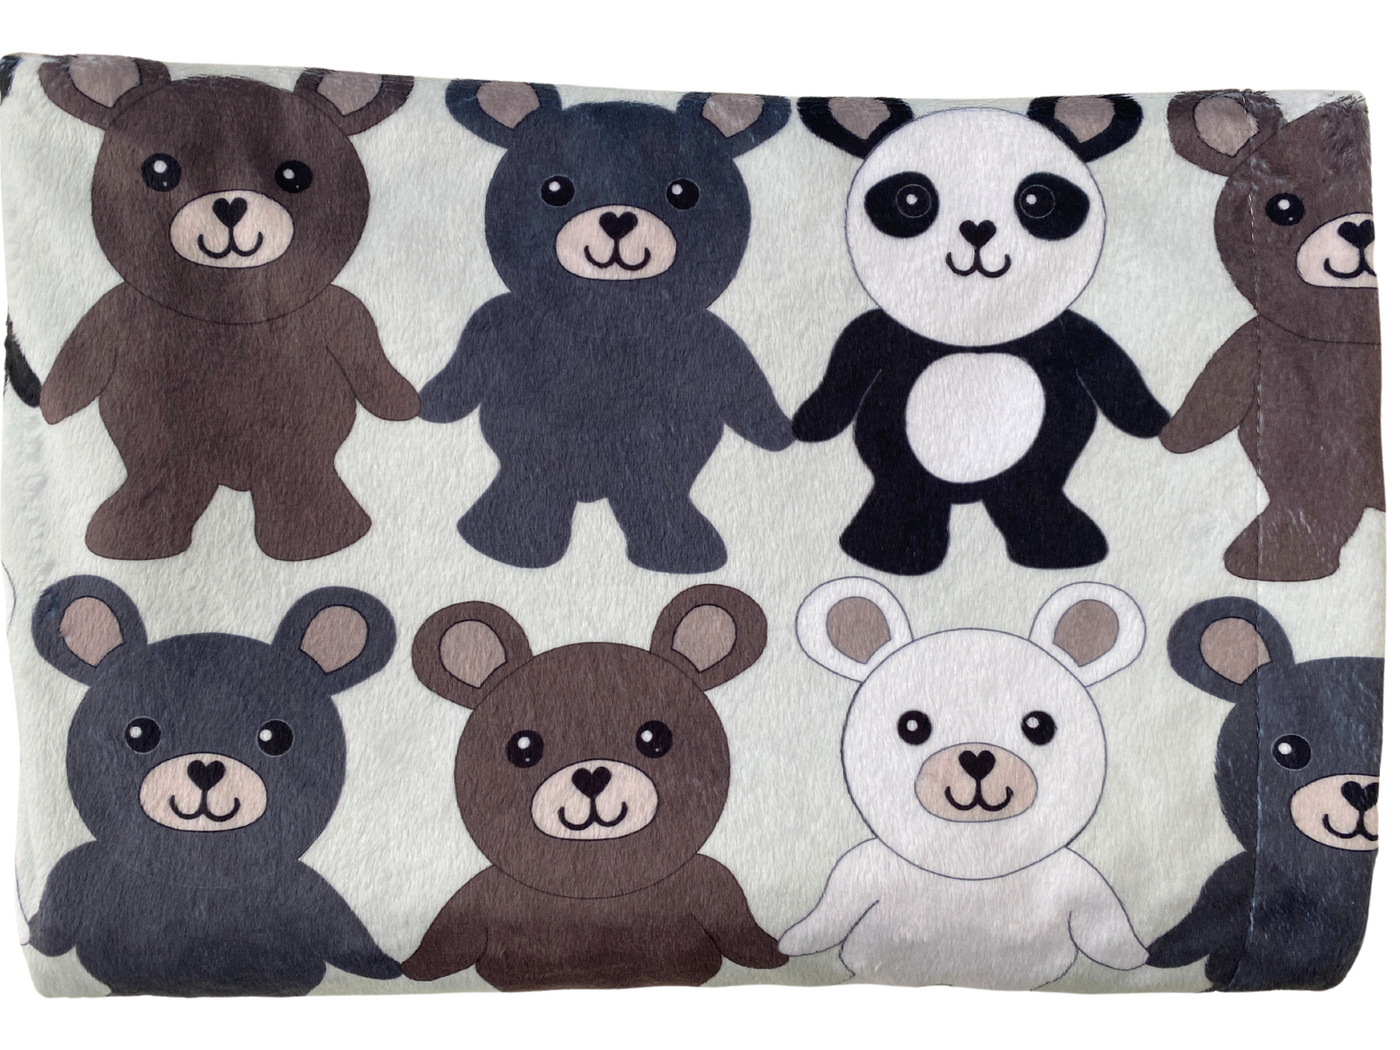 Giant blanket: Let's hold hands (pandas and bears)